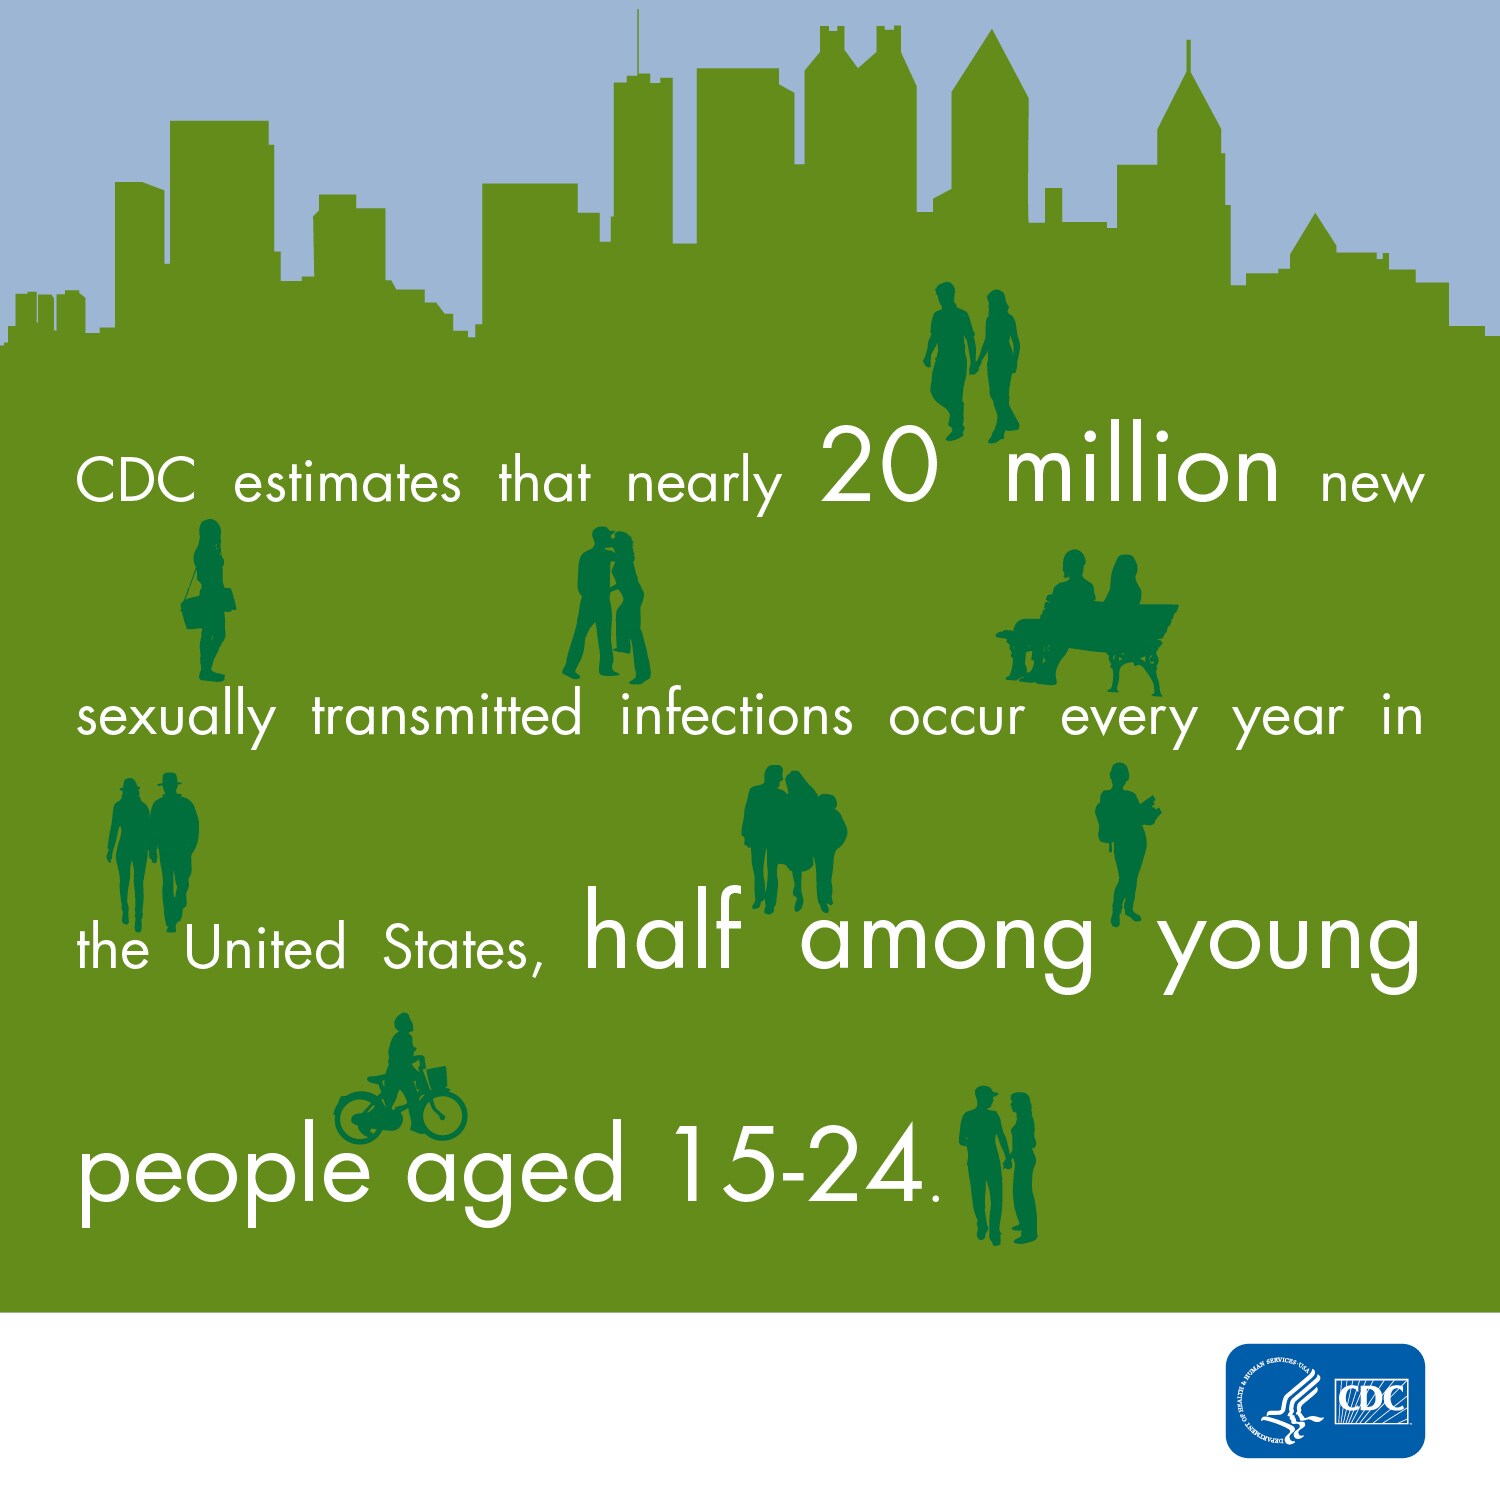 CDC estimates that nearly 20 million new sexually transmitted infections occur every year in the United States, half among young people ages 15-24.